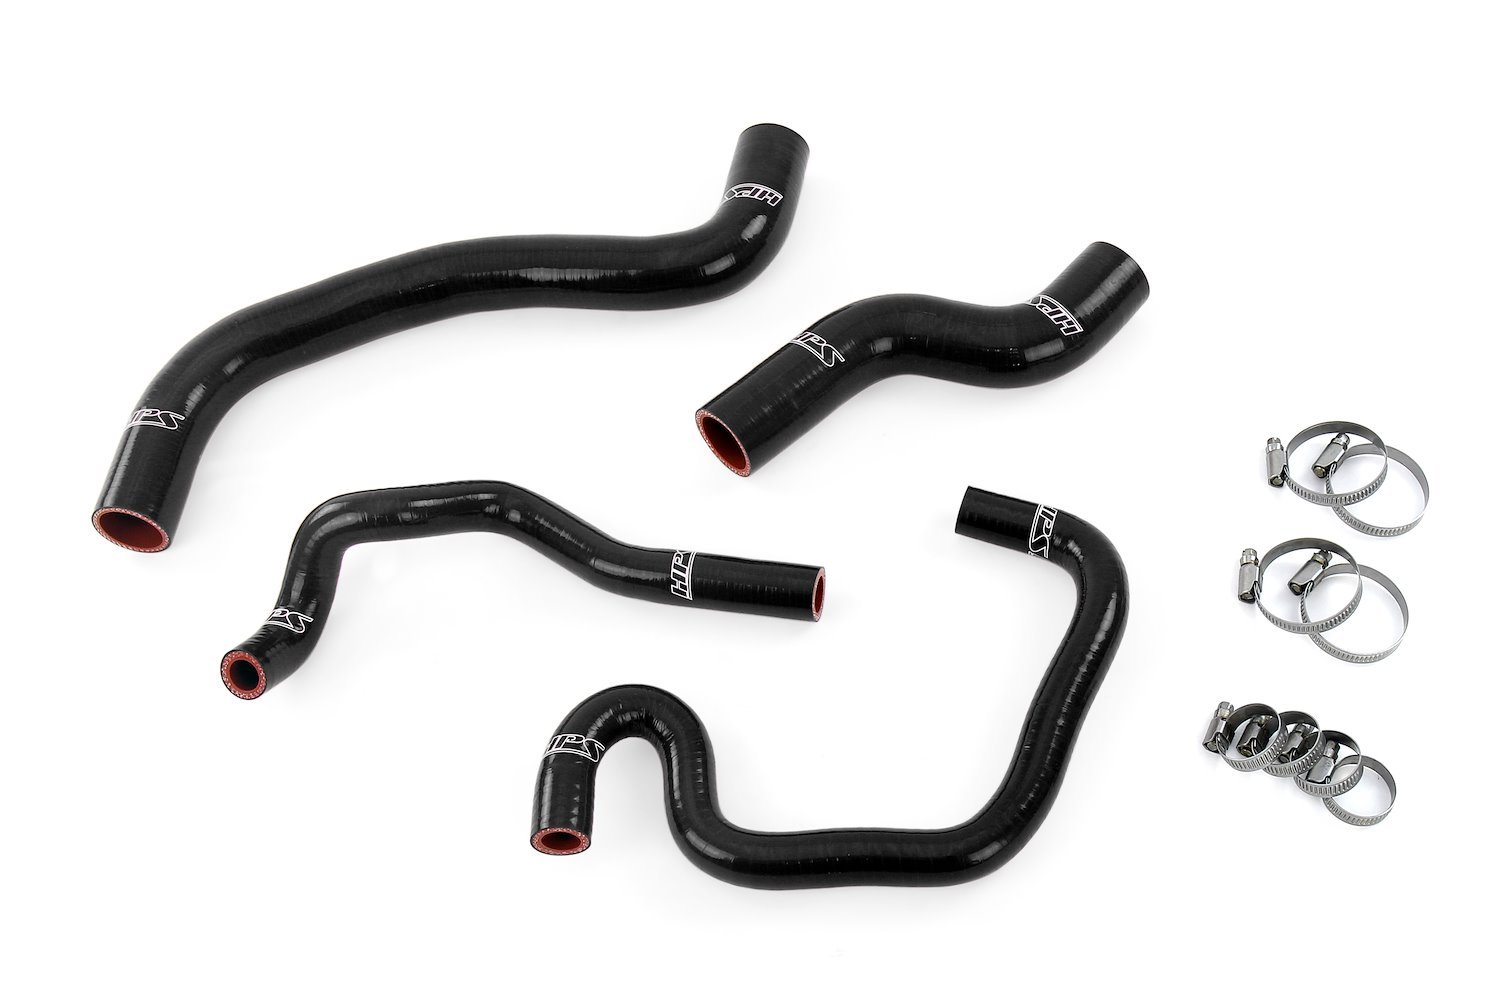 57-1080-BLK Coolant Hose Kit, 3-Ply Reinforced Silicone, Replaces Rubber Radiator & Heater Coolant Hoses